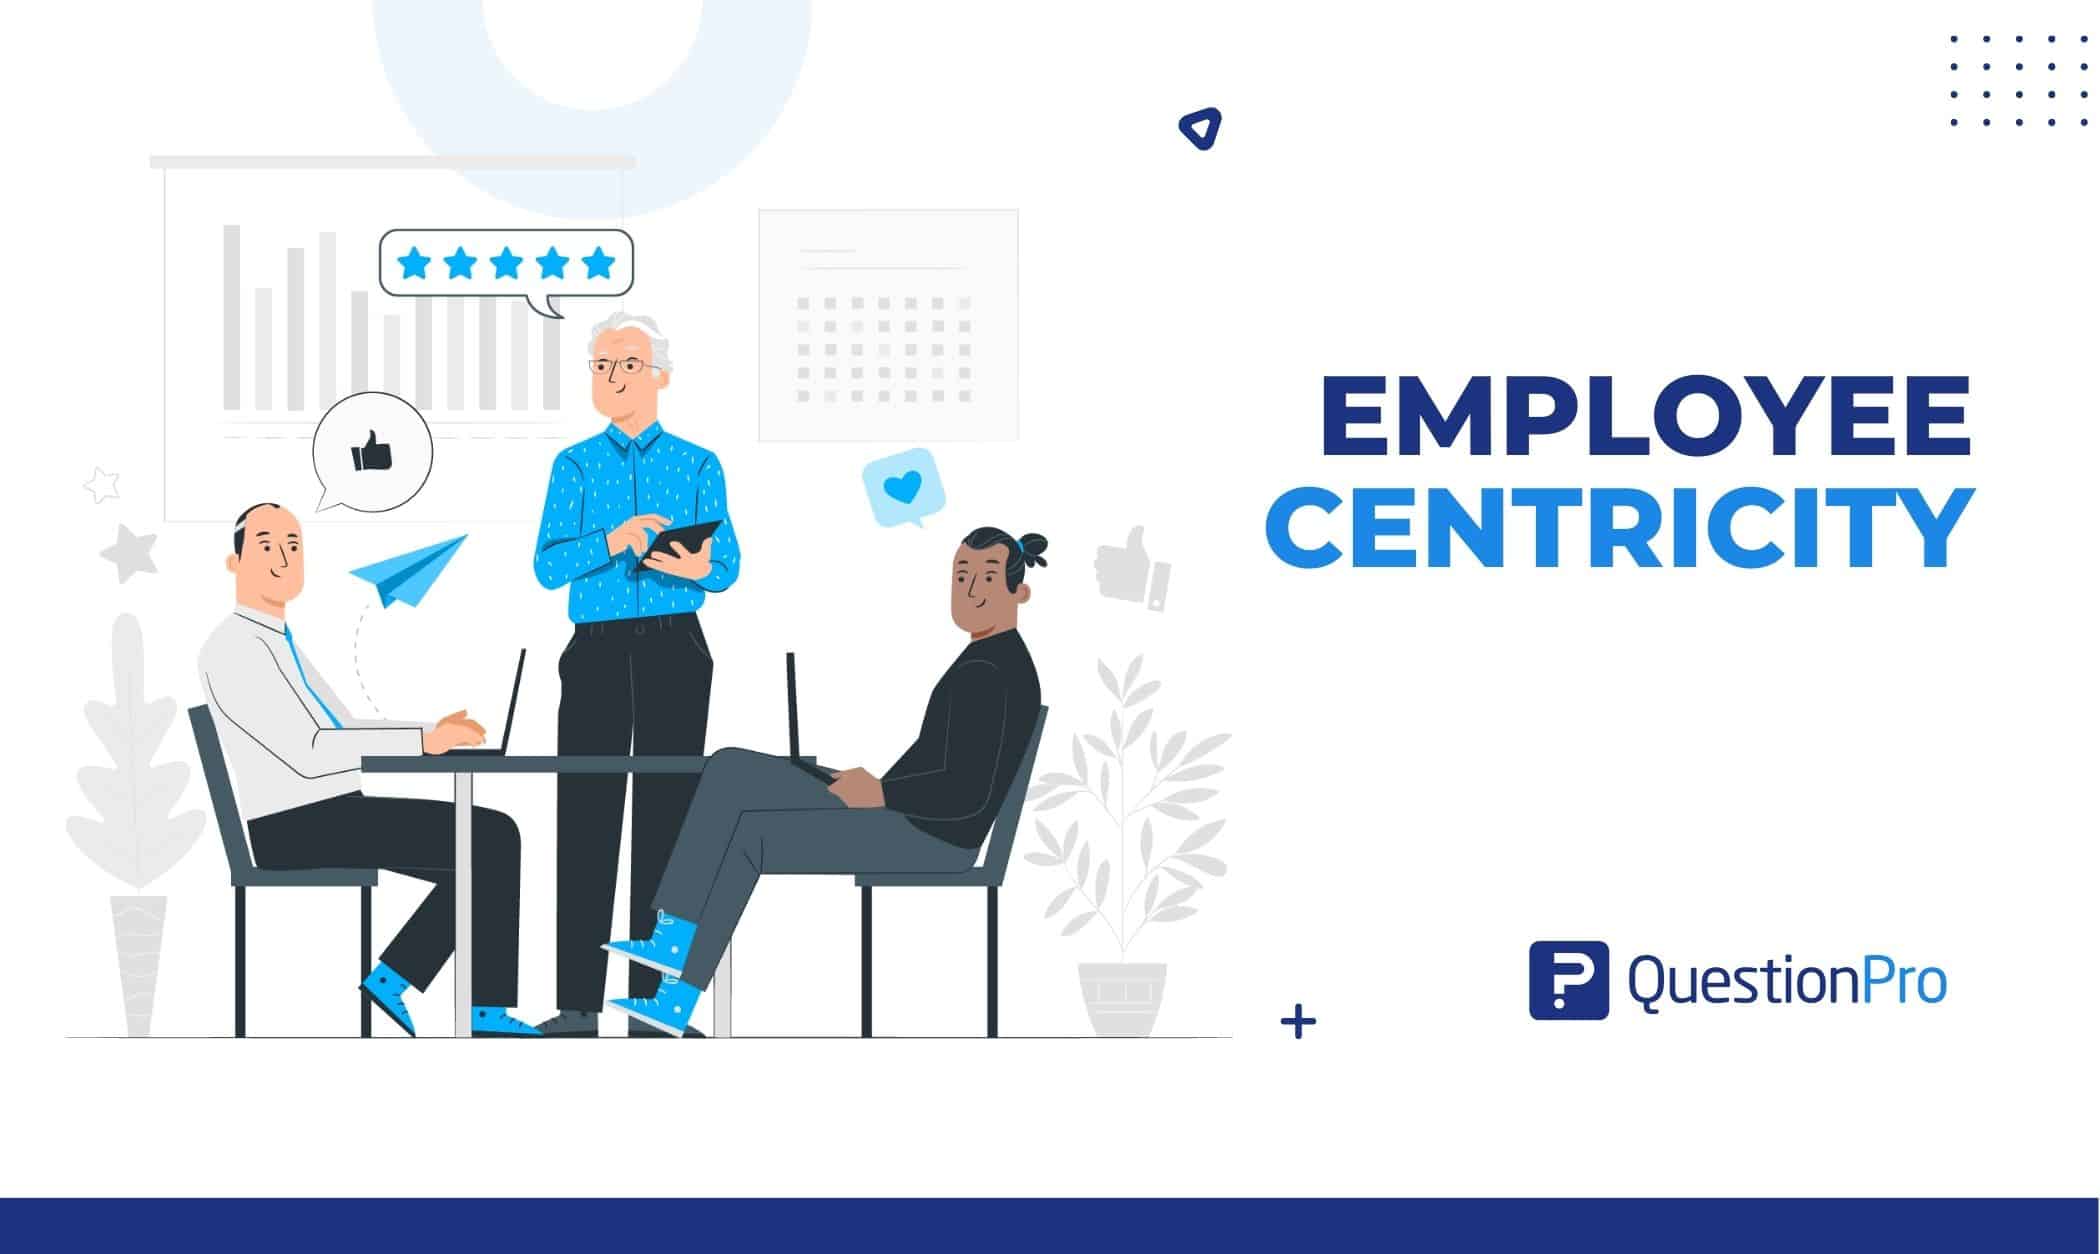 Employee centricity aims to help leaders and their organizations do better. Let's talk about how we can create employee-centric culture.